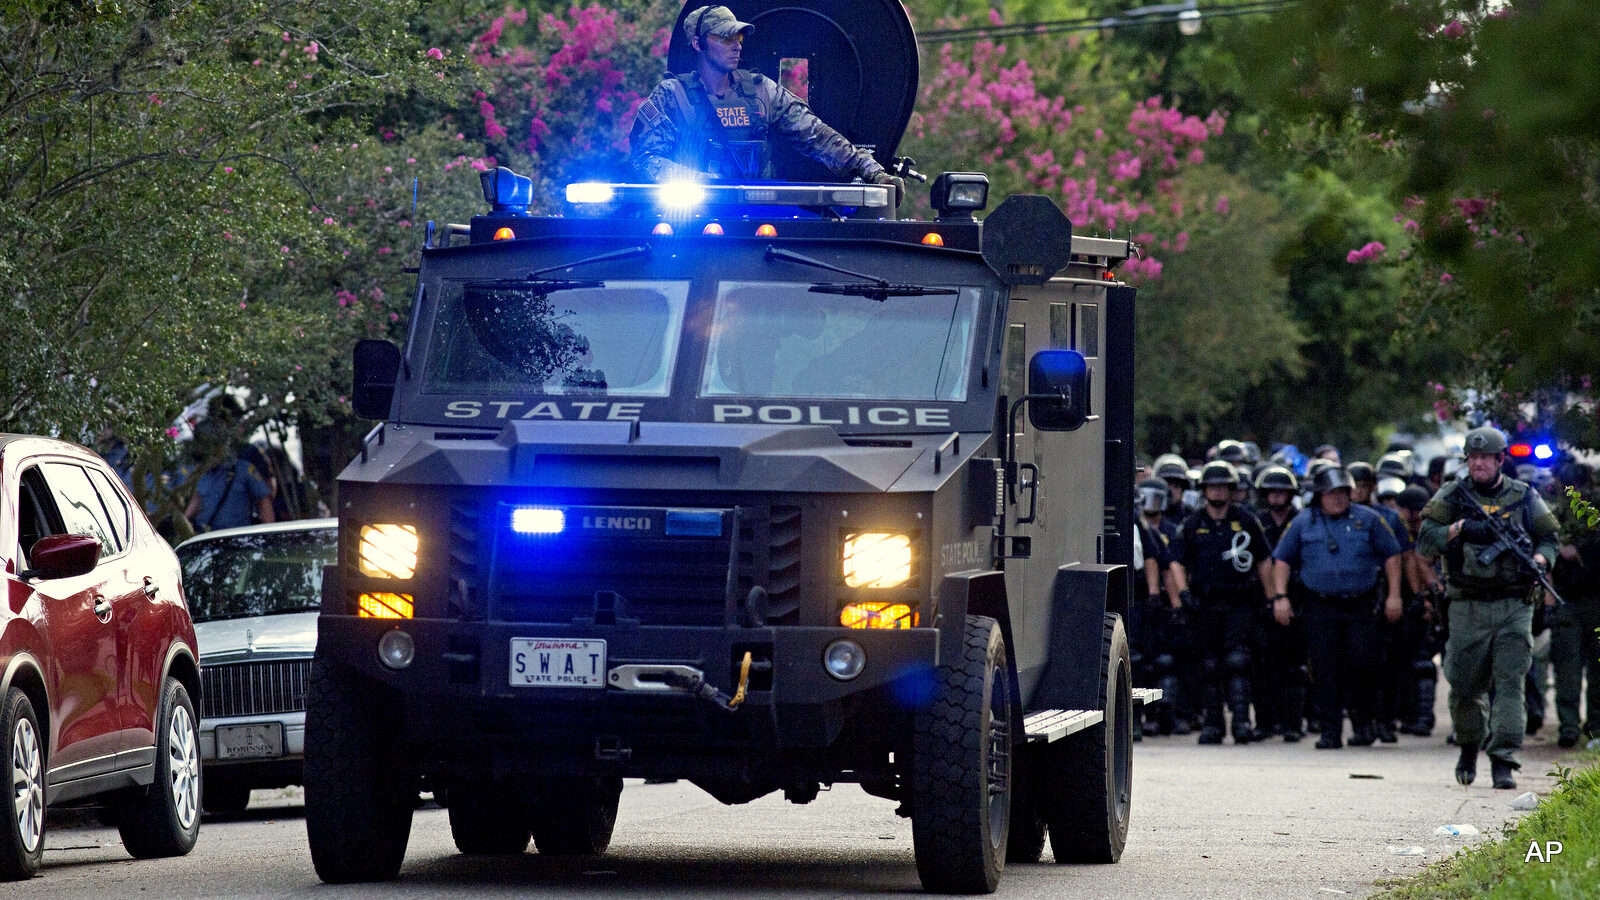 An armored police truck leads a troop of police through a residential neighborhood in Baton Rouge, La. on Sunday, July 10, 2016.